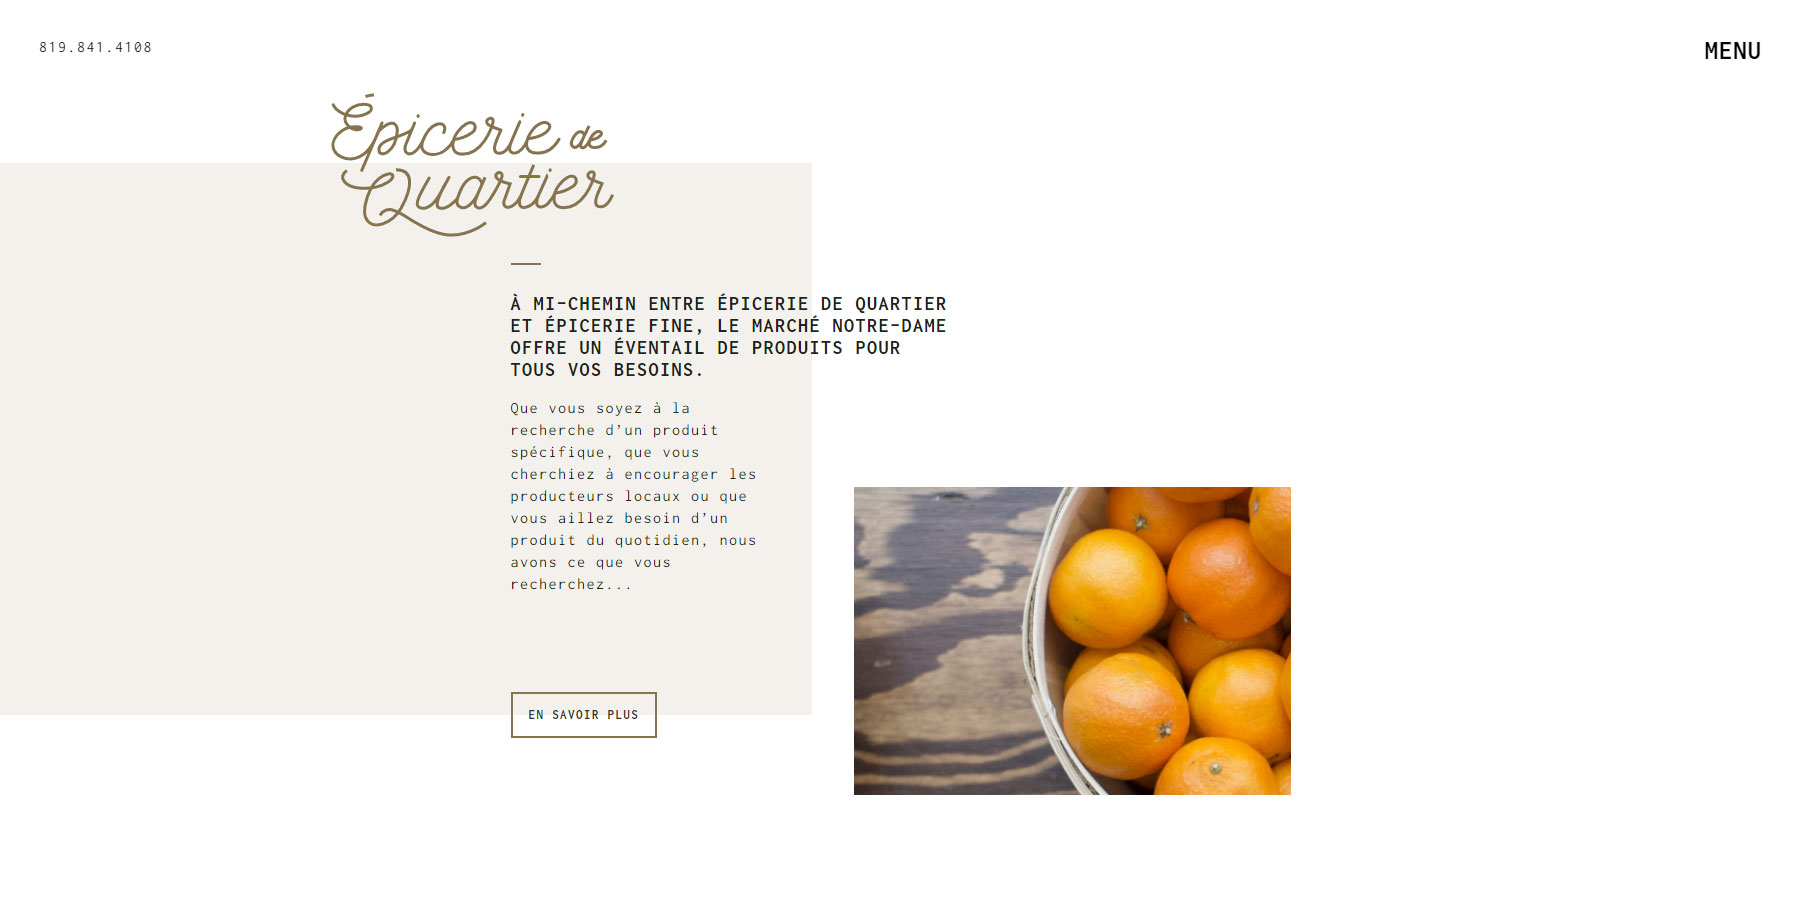 Marché Notre-Dame - Website of the Day